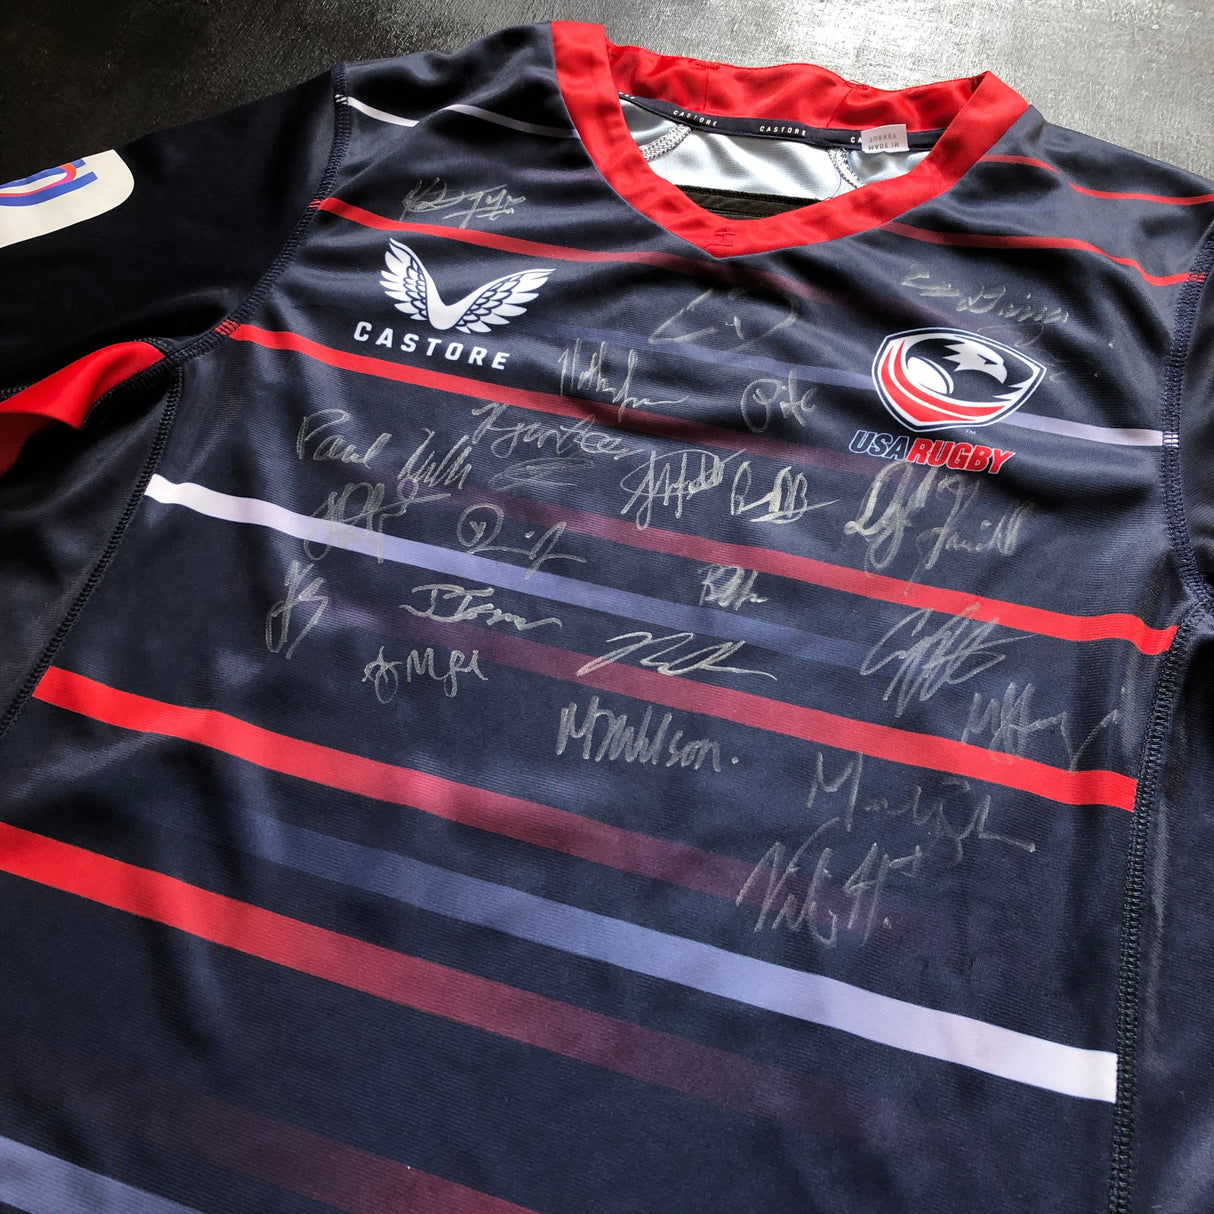 USA National Rugby Team Jersey 2022 Match Worn and Signed Medium Underdog Rugby - The Tier 2 Rugby Shop 